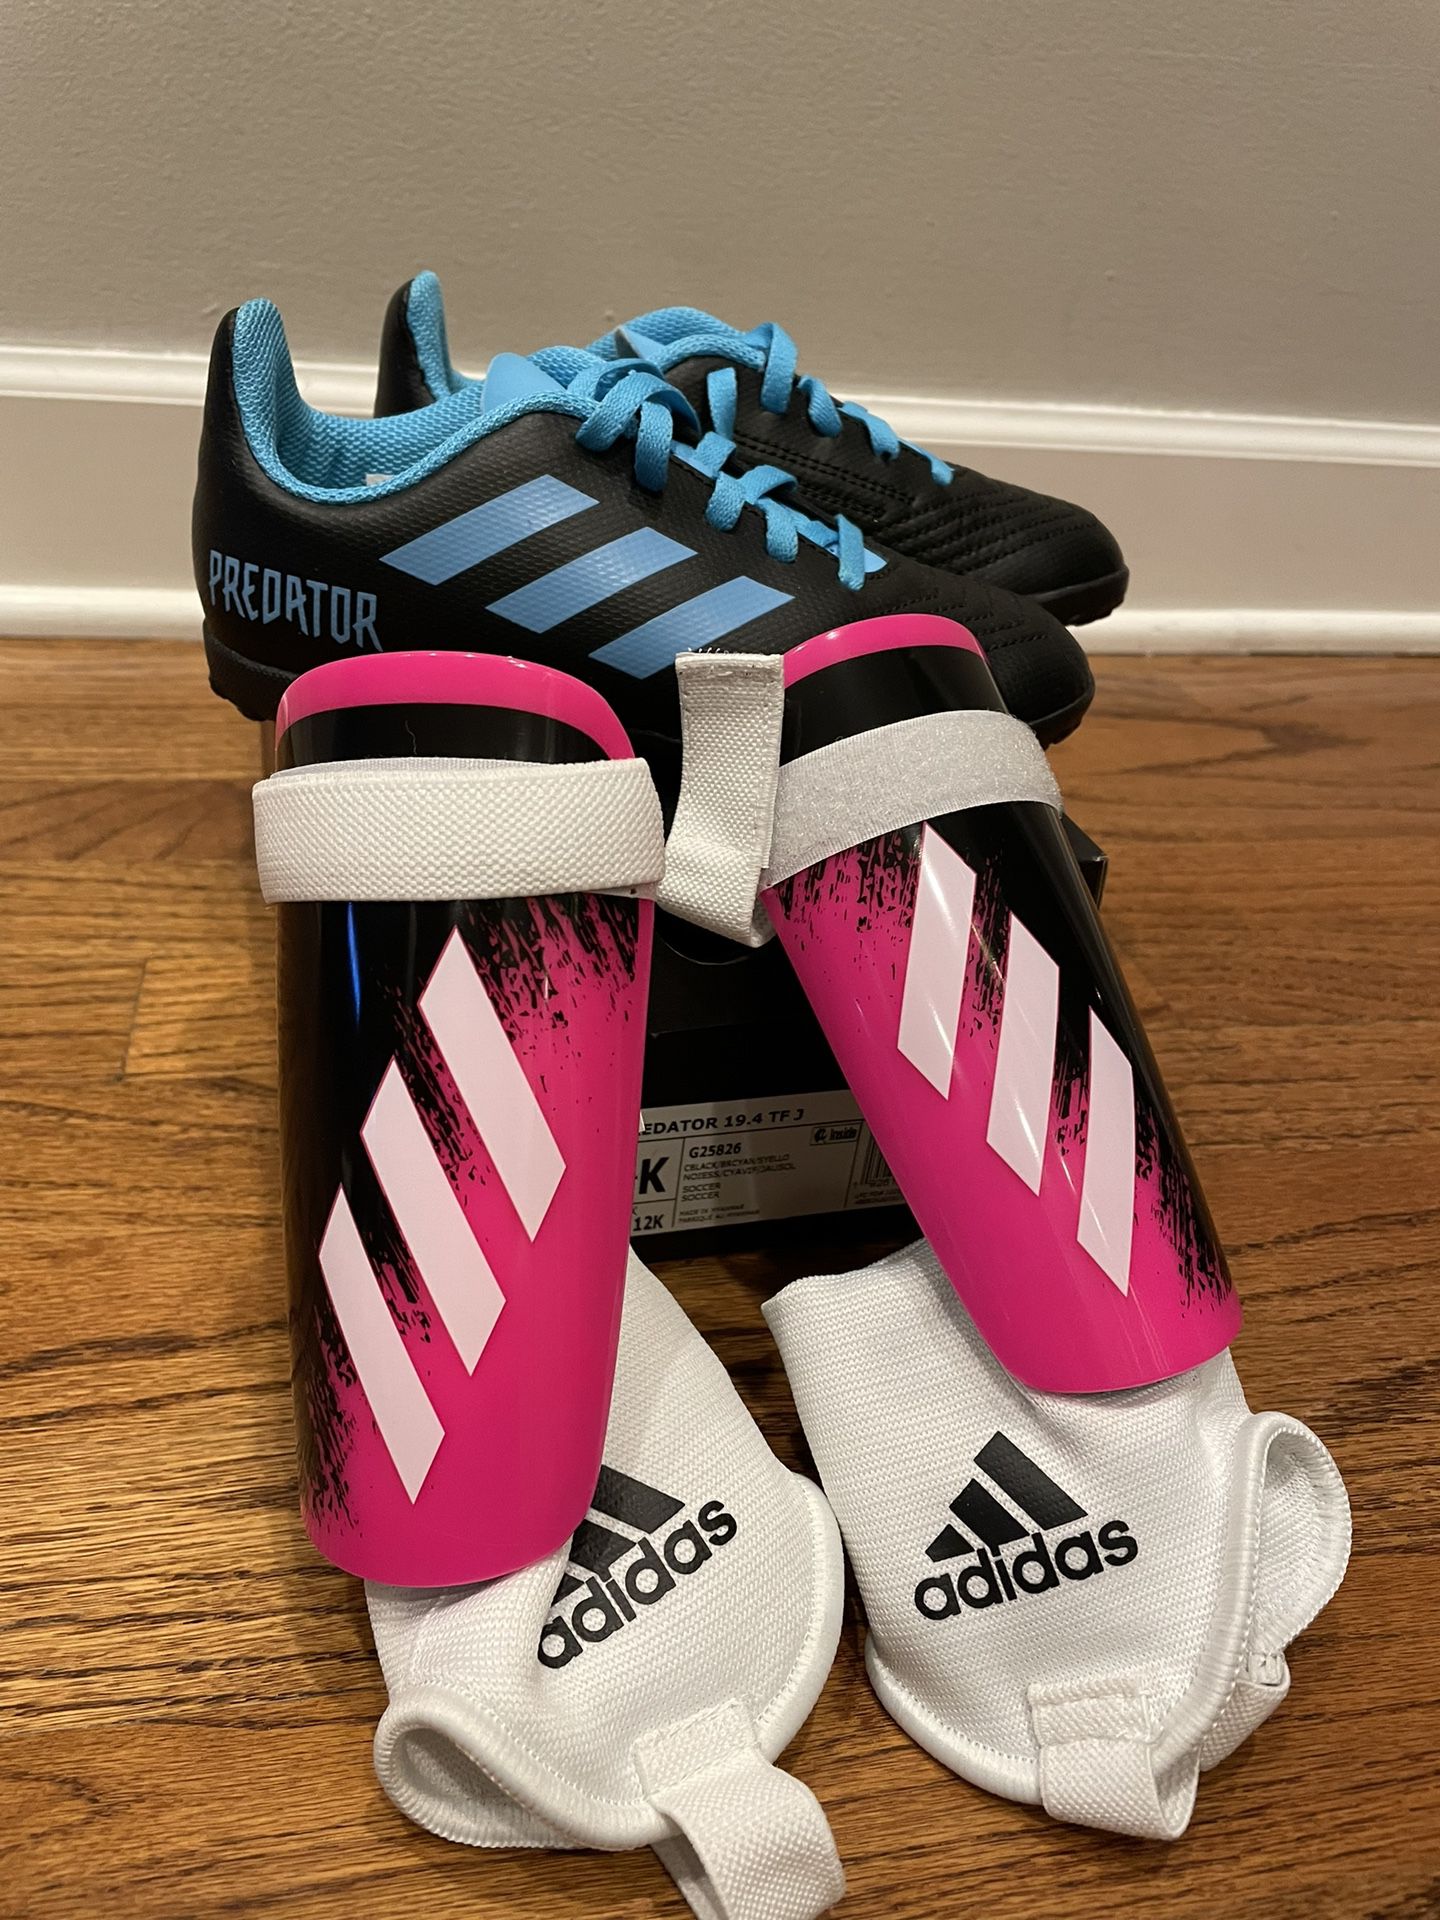 Soccer Shoes New, Size 12.5 Adidas 